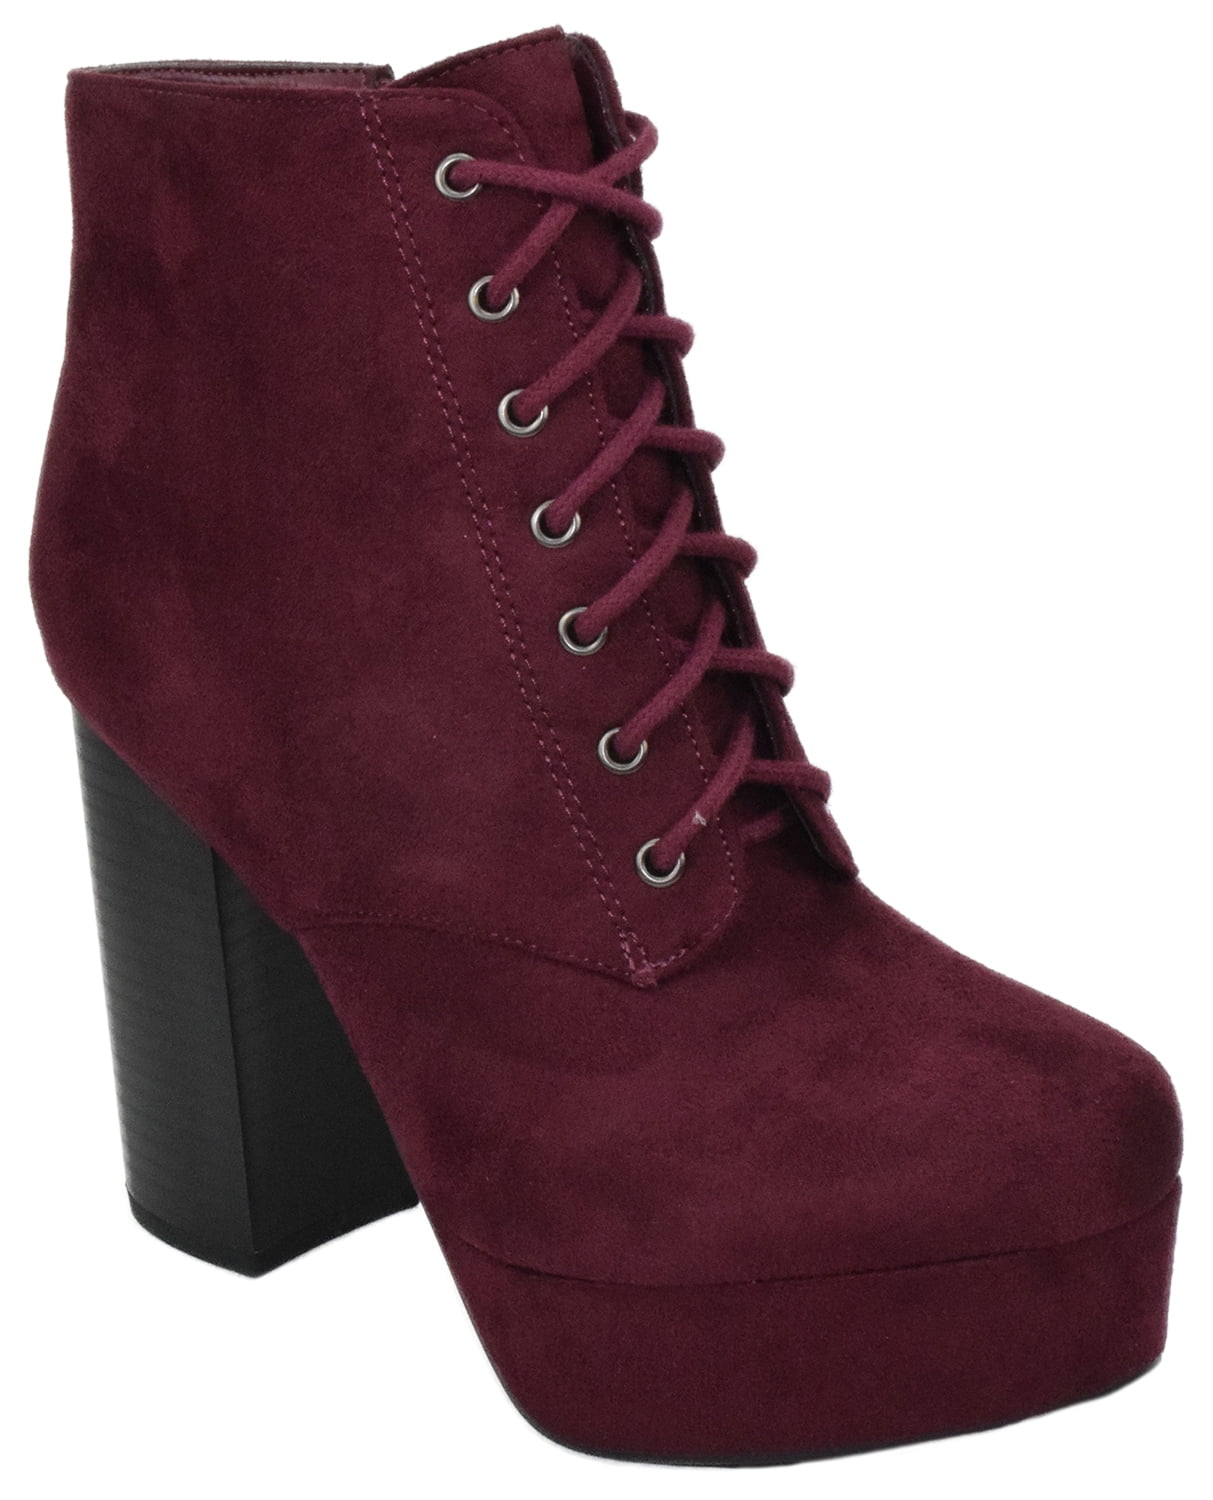 Ankle Boots for Womens Chunky High Heels Lace up Zipper Suede Booties for Autumn